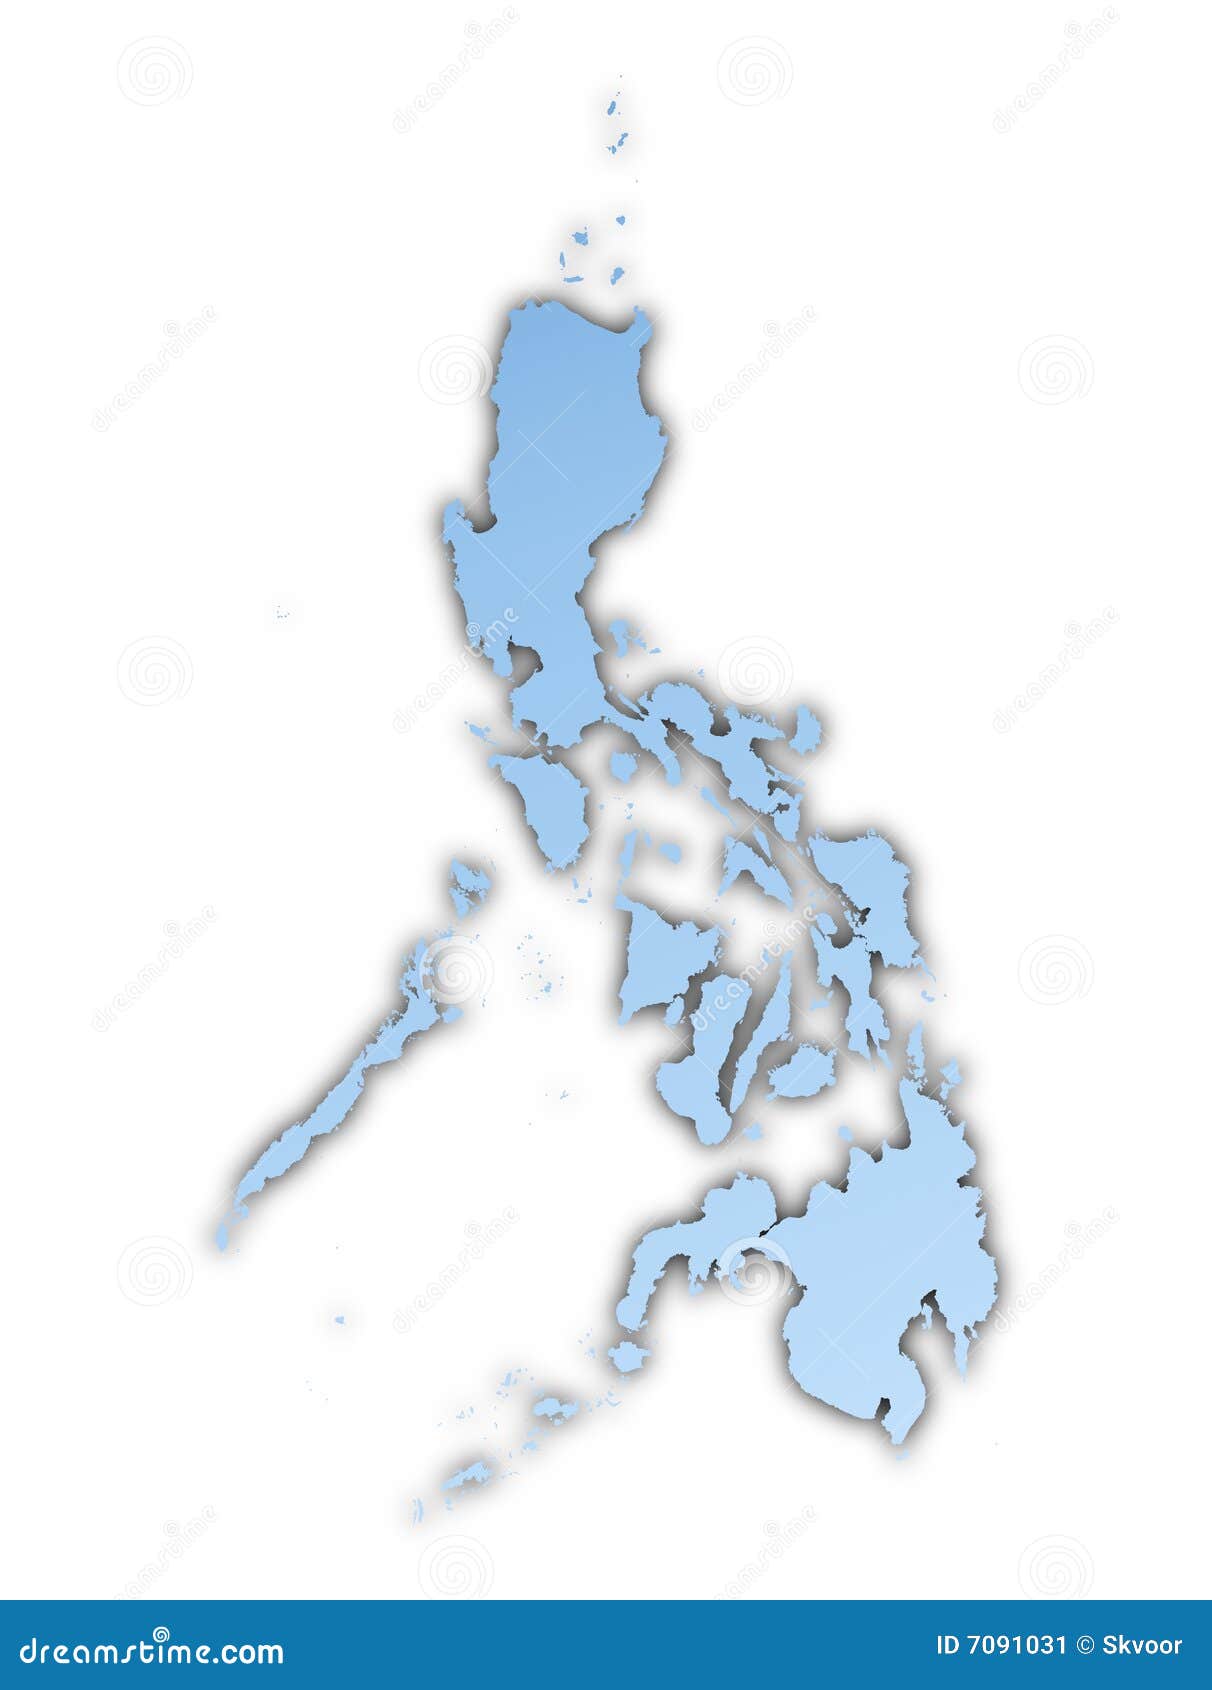 philippine map clipart black and white - photo #30